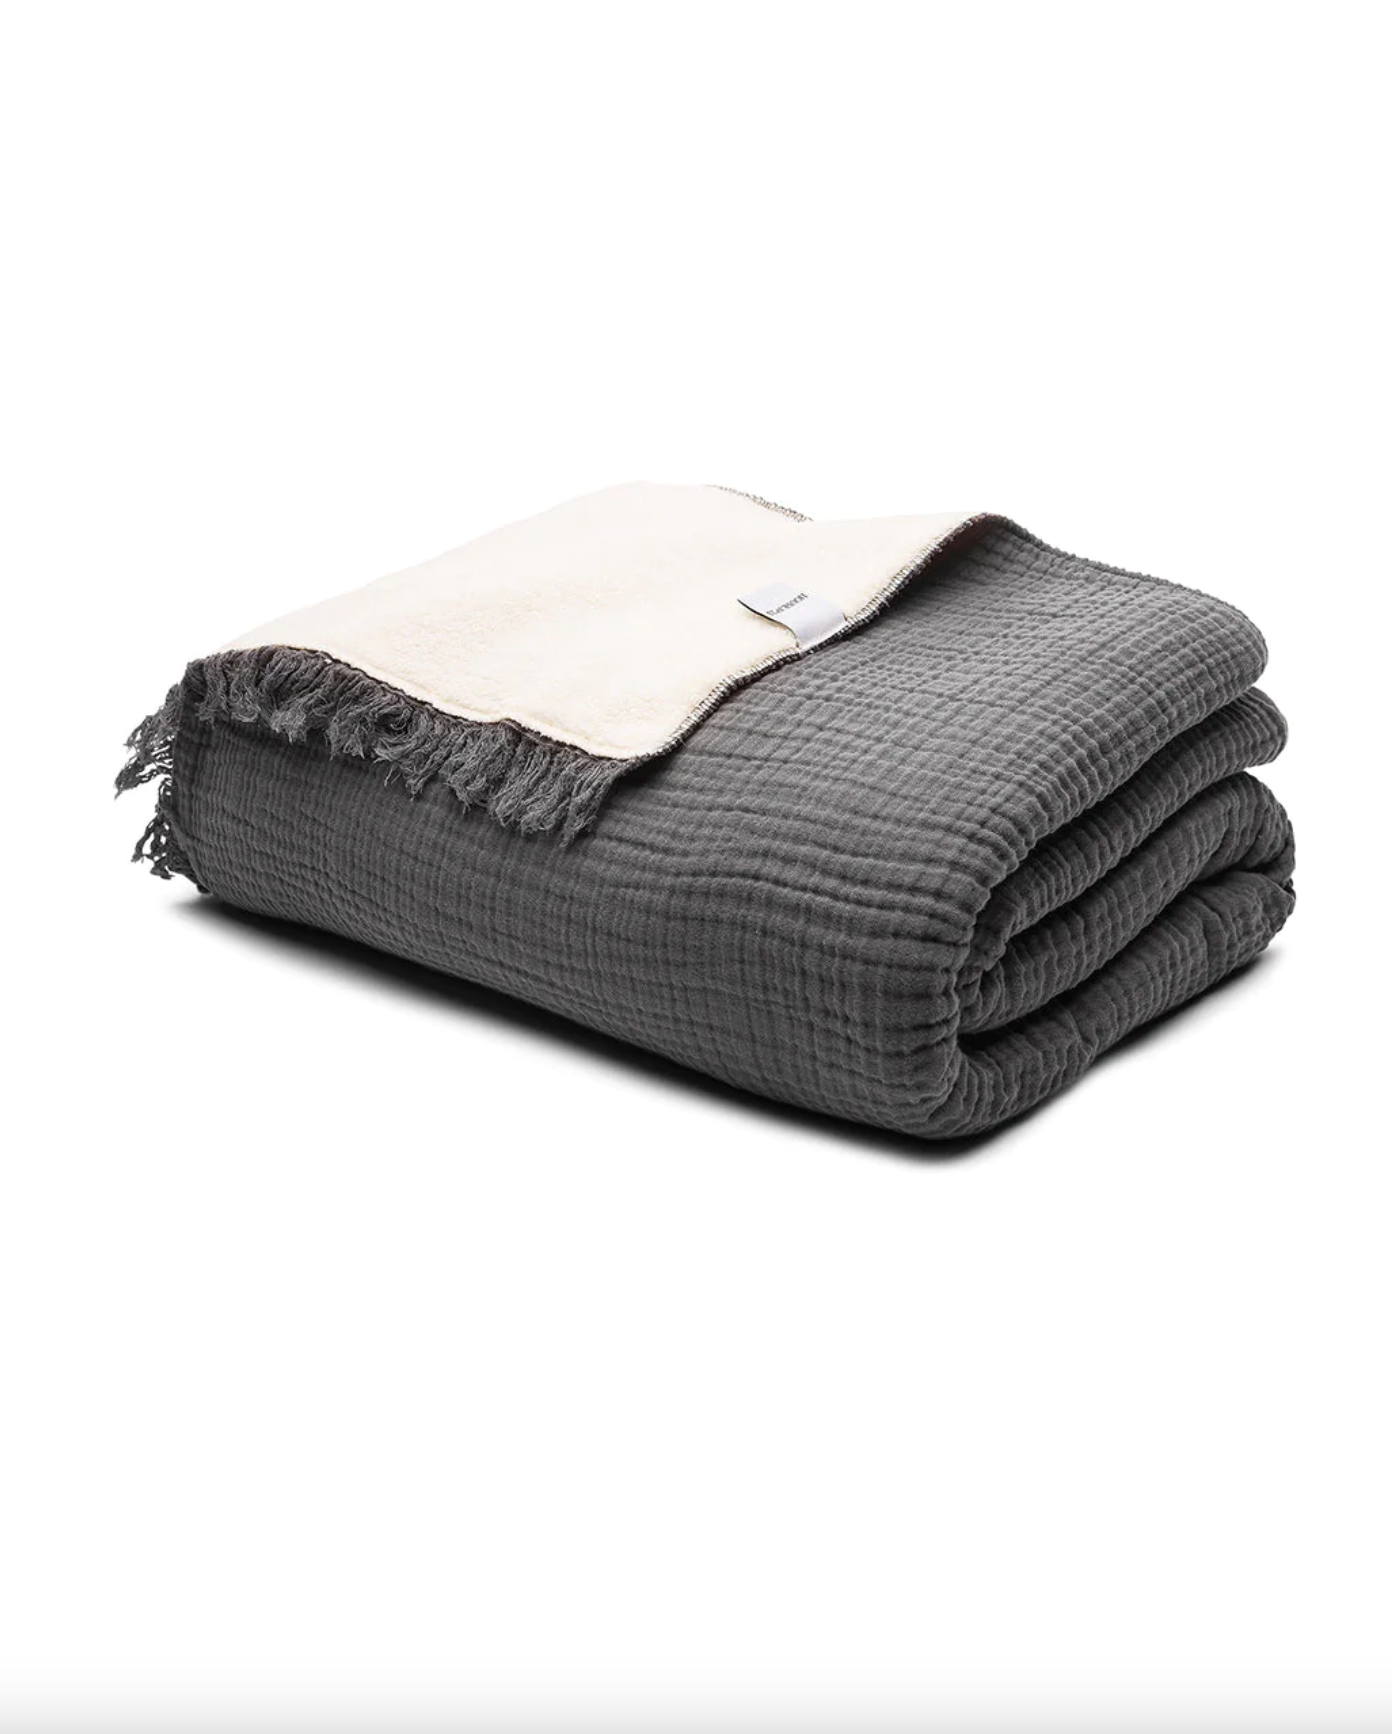 Alaia sherpa Throw in Anthracite